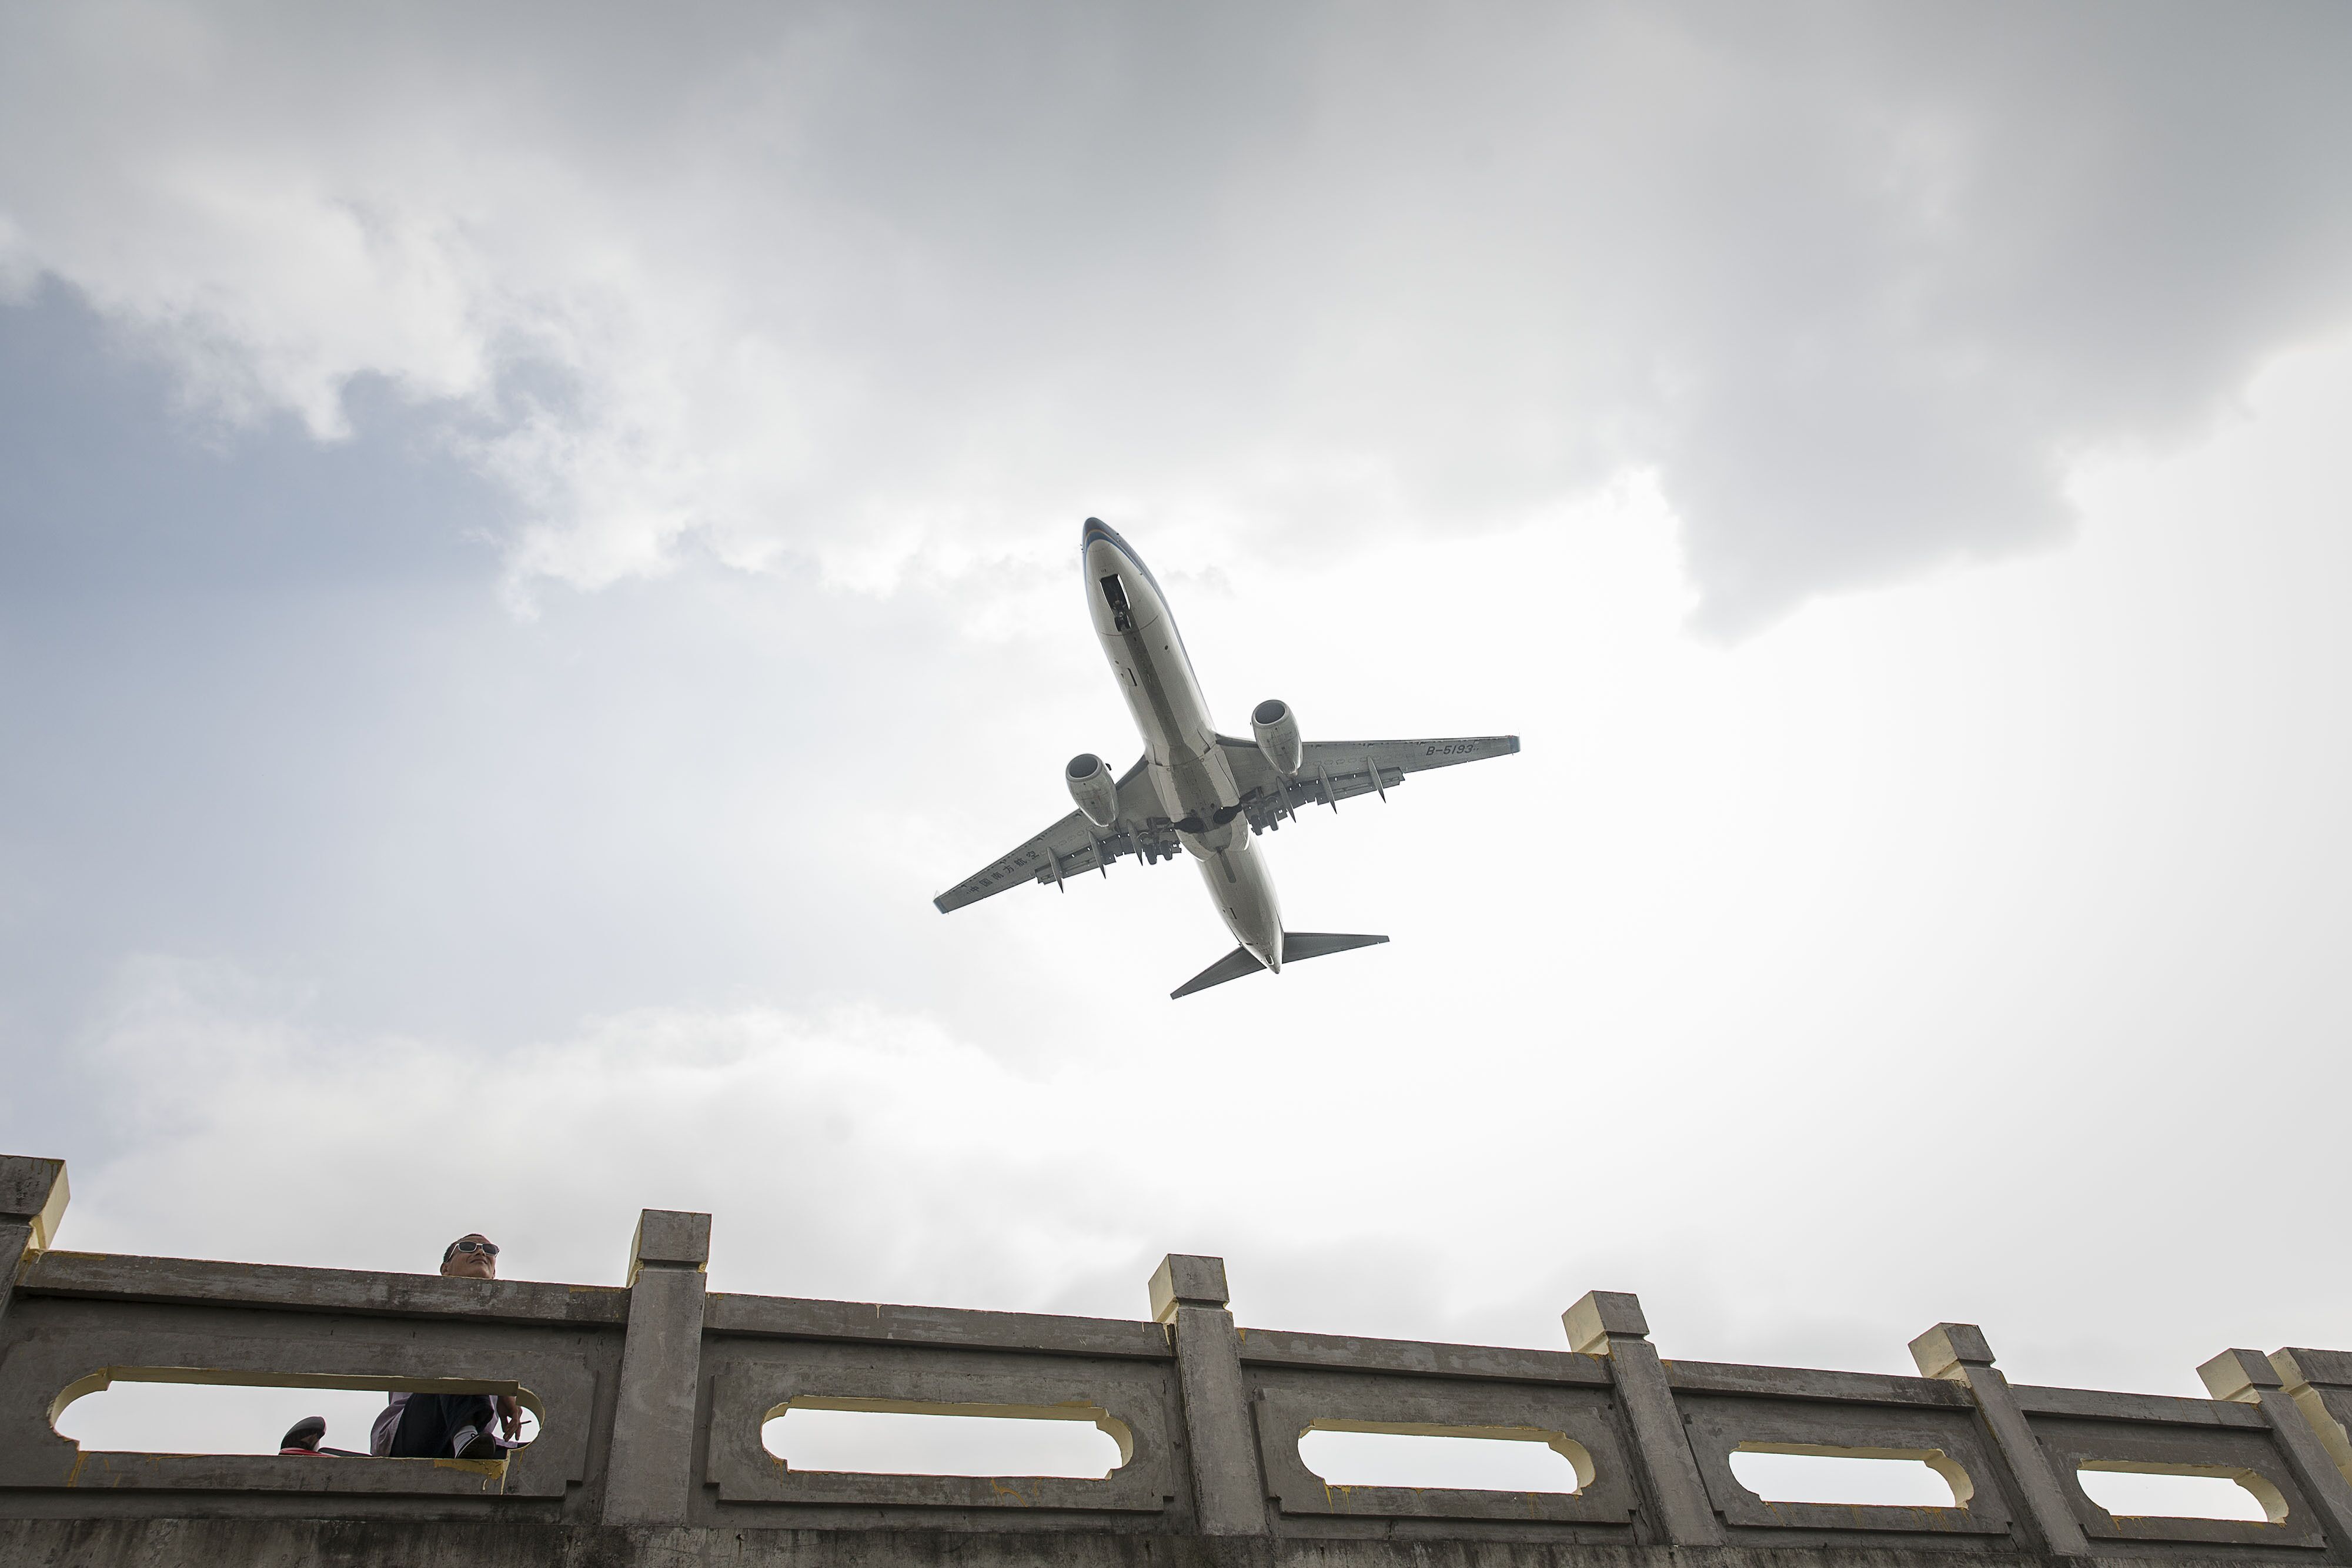 A China Southern Airlines Co. aircraft flies over a man standing on a pedestrian bridge as it approaches to land at Hongqiao Airport in Shanghai, China, on Oct. 23, 2015. Photo: Bloomberg